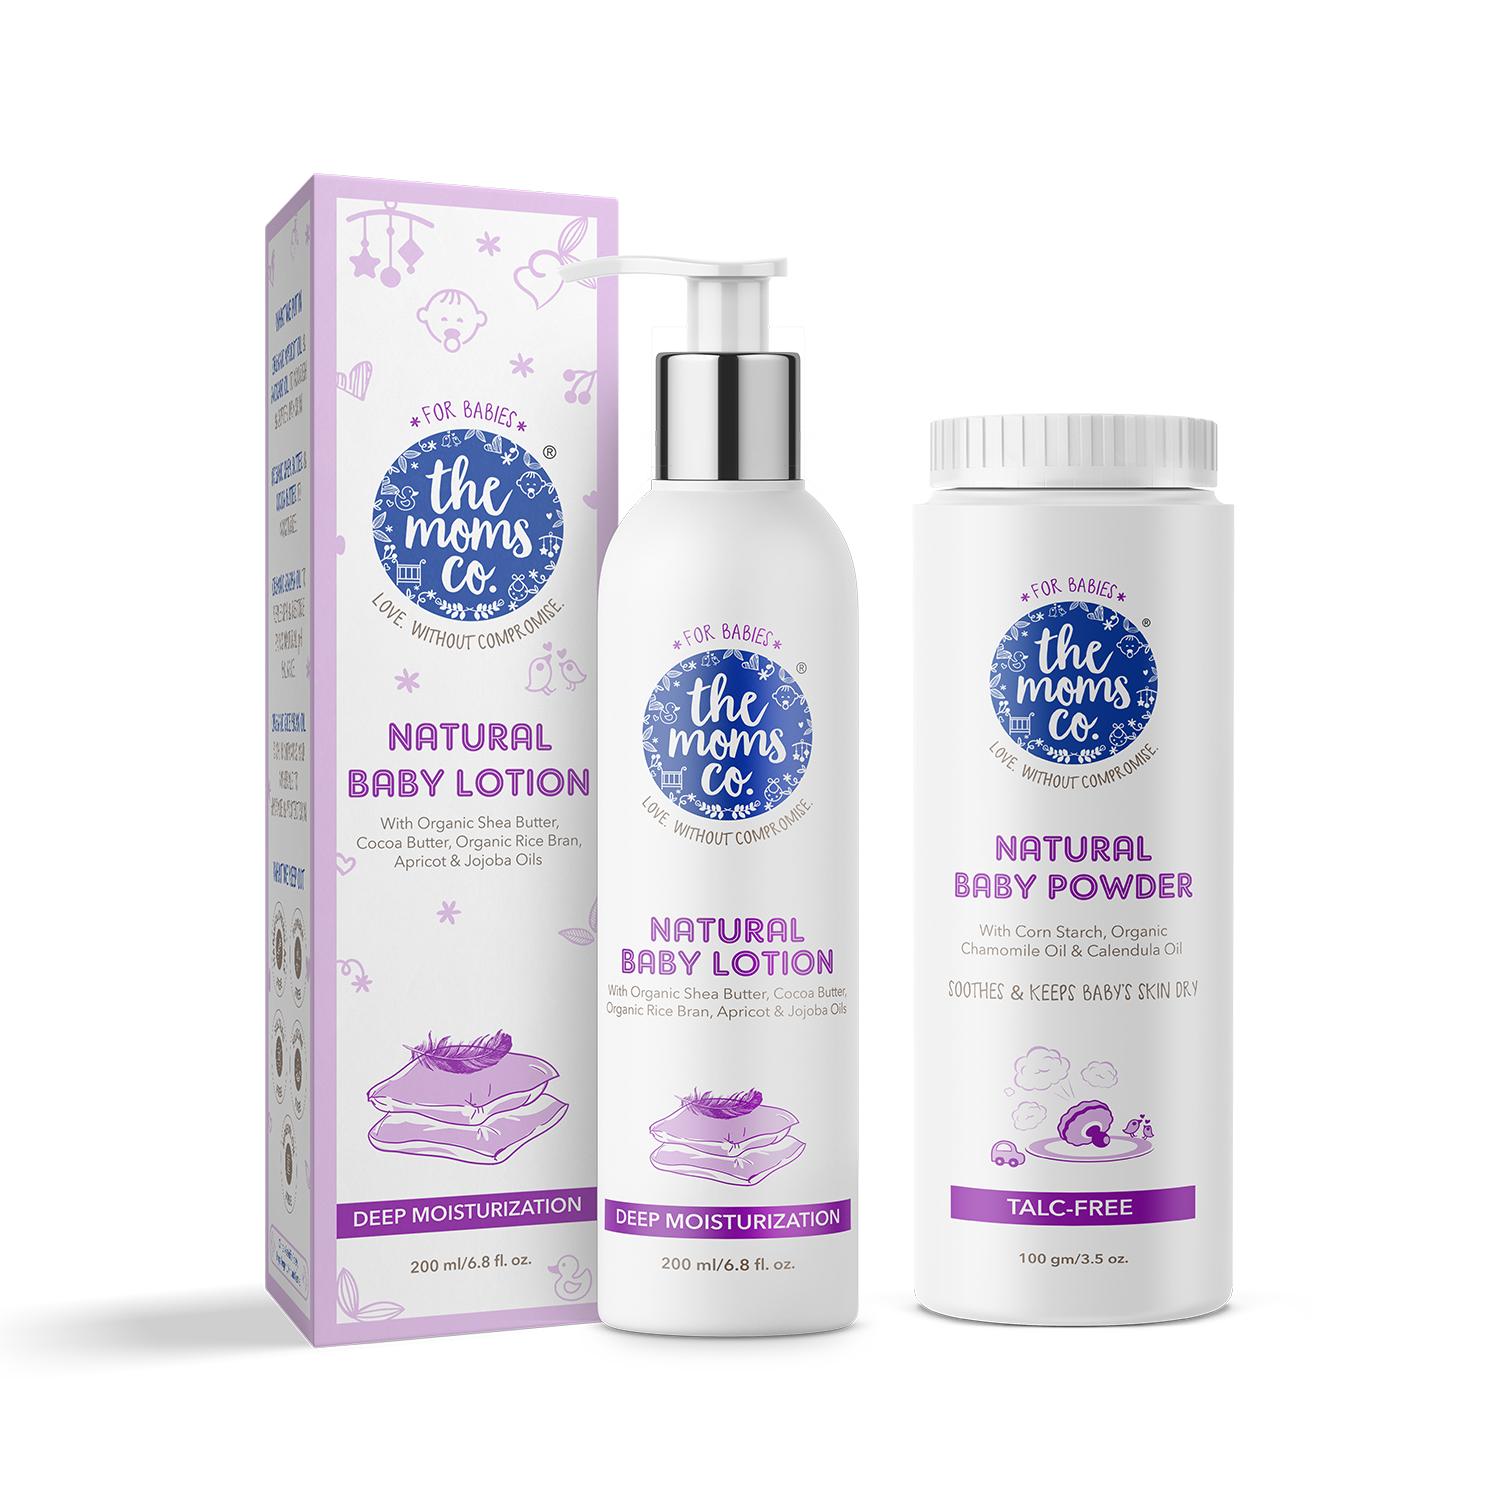 The Mom's Co. | The Mom's Co. Talc-Free Natural Baby Powder & Natural Baby Lotion Combo